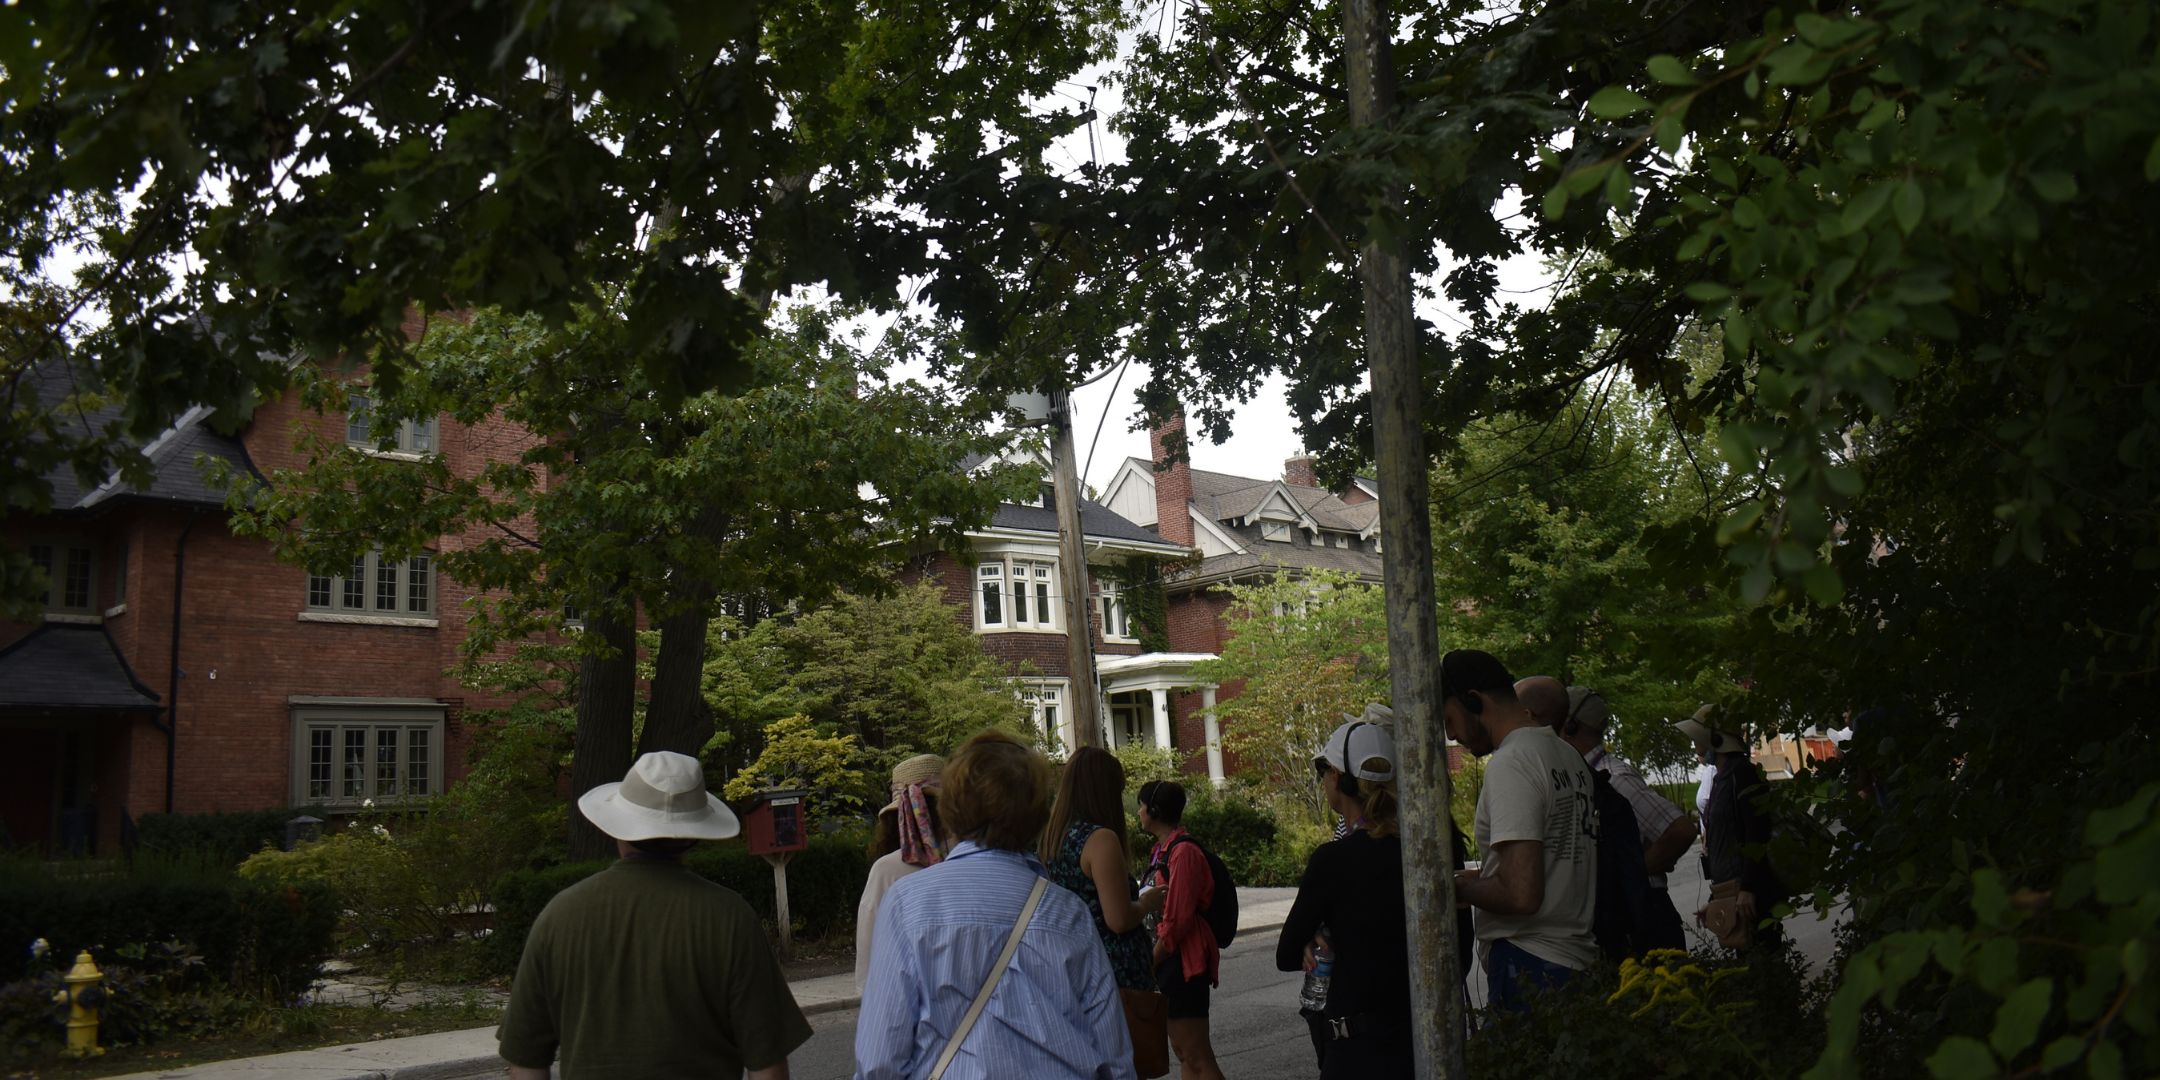 People are looking at a house on a residential street with large trees.